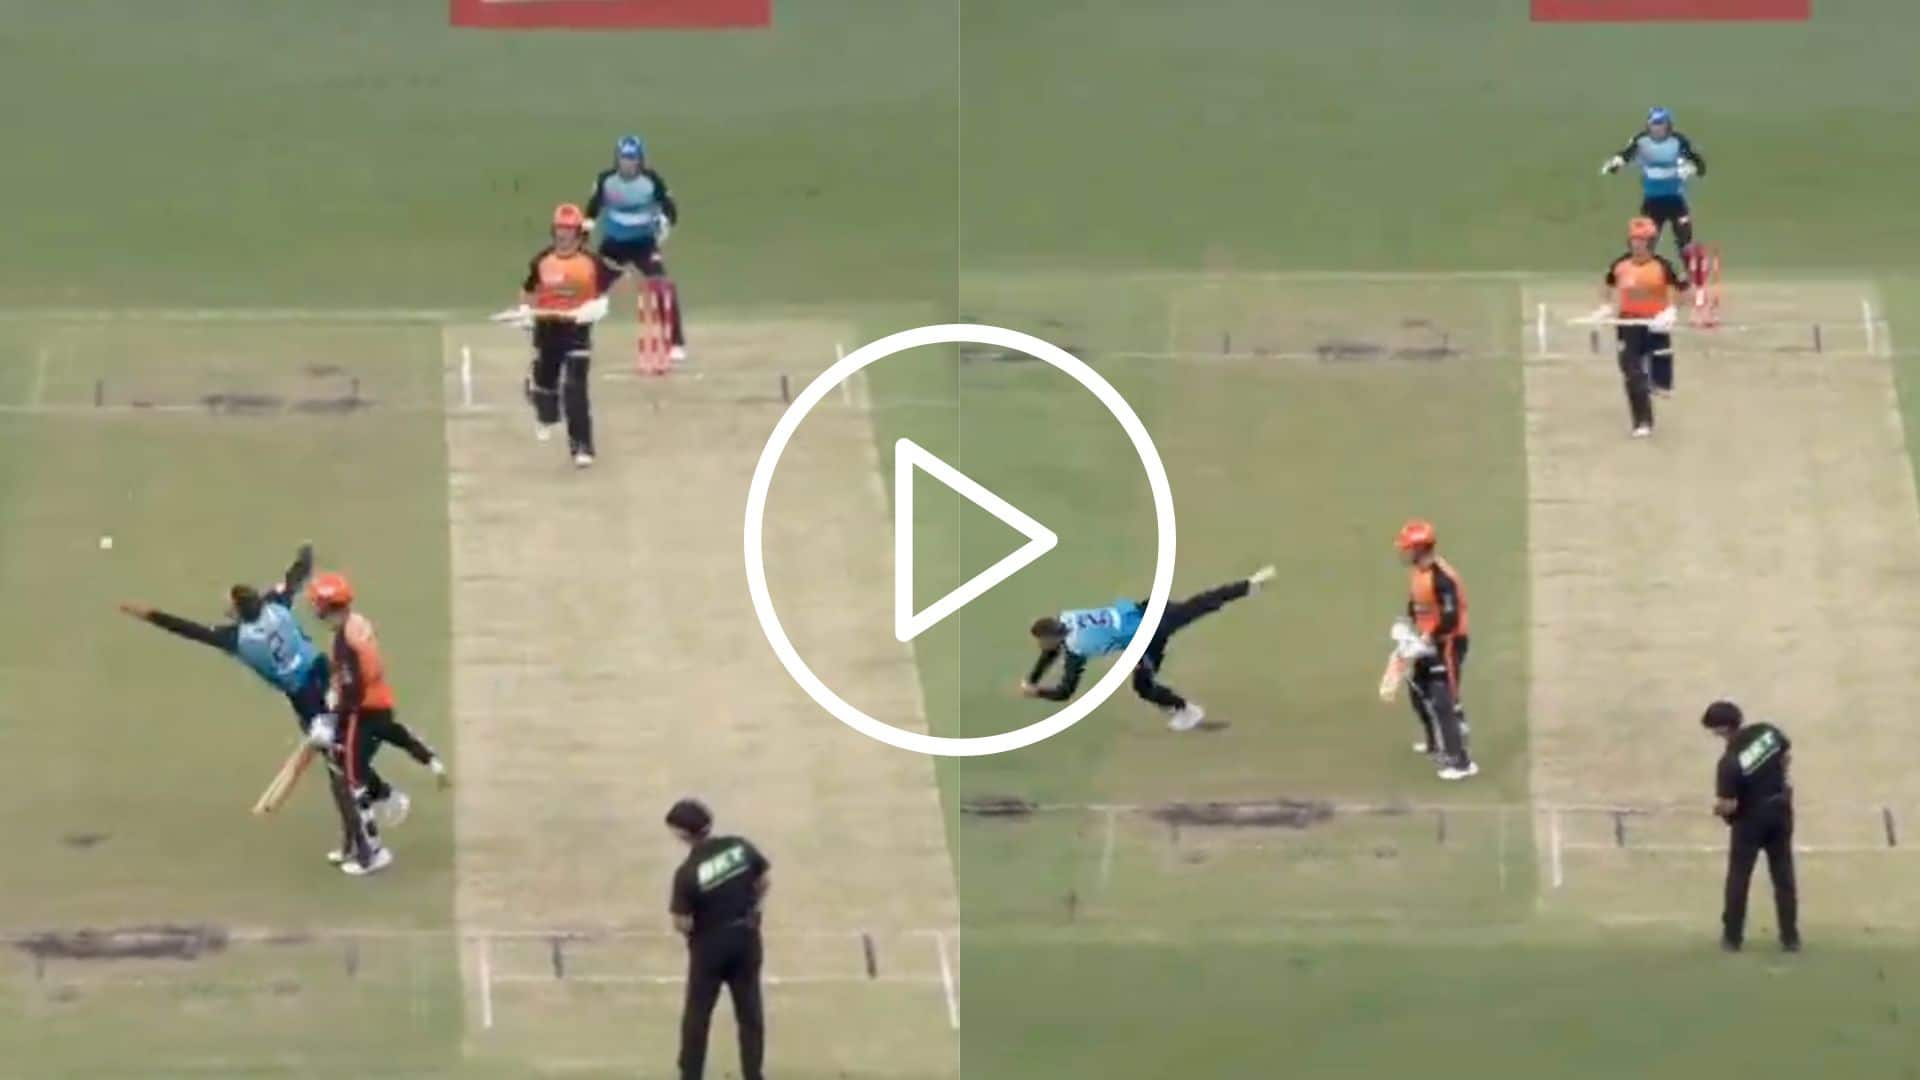 [Watch] Matthew Short Plucks A One-Handed Stunner To Dismiss Nick Hobson In BBL